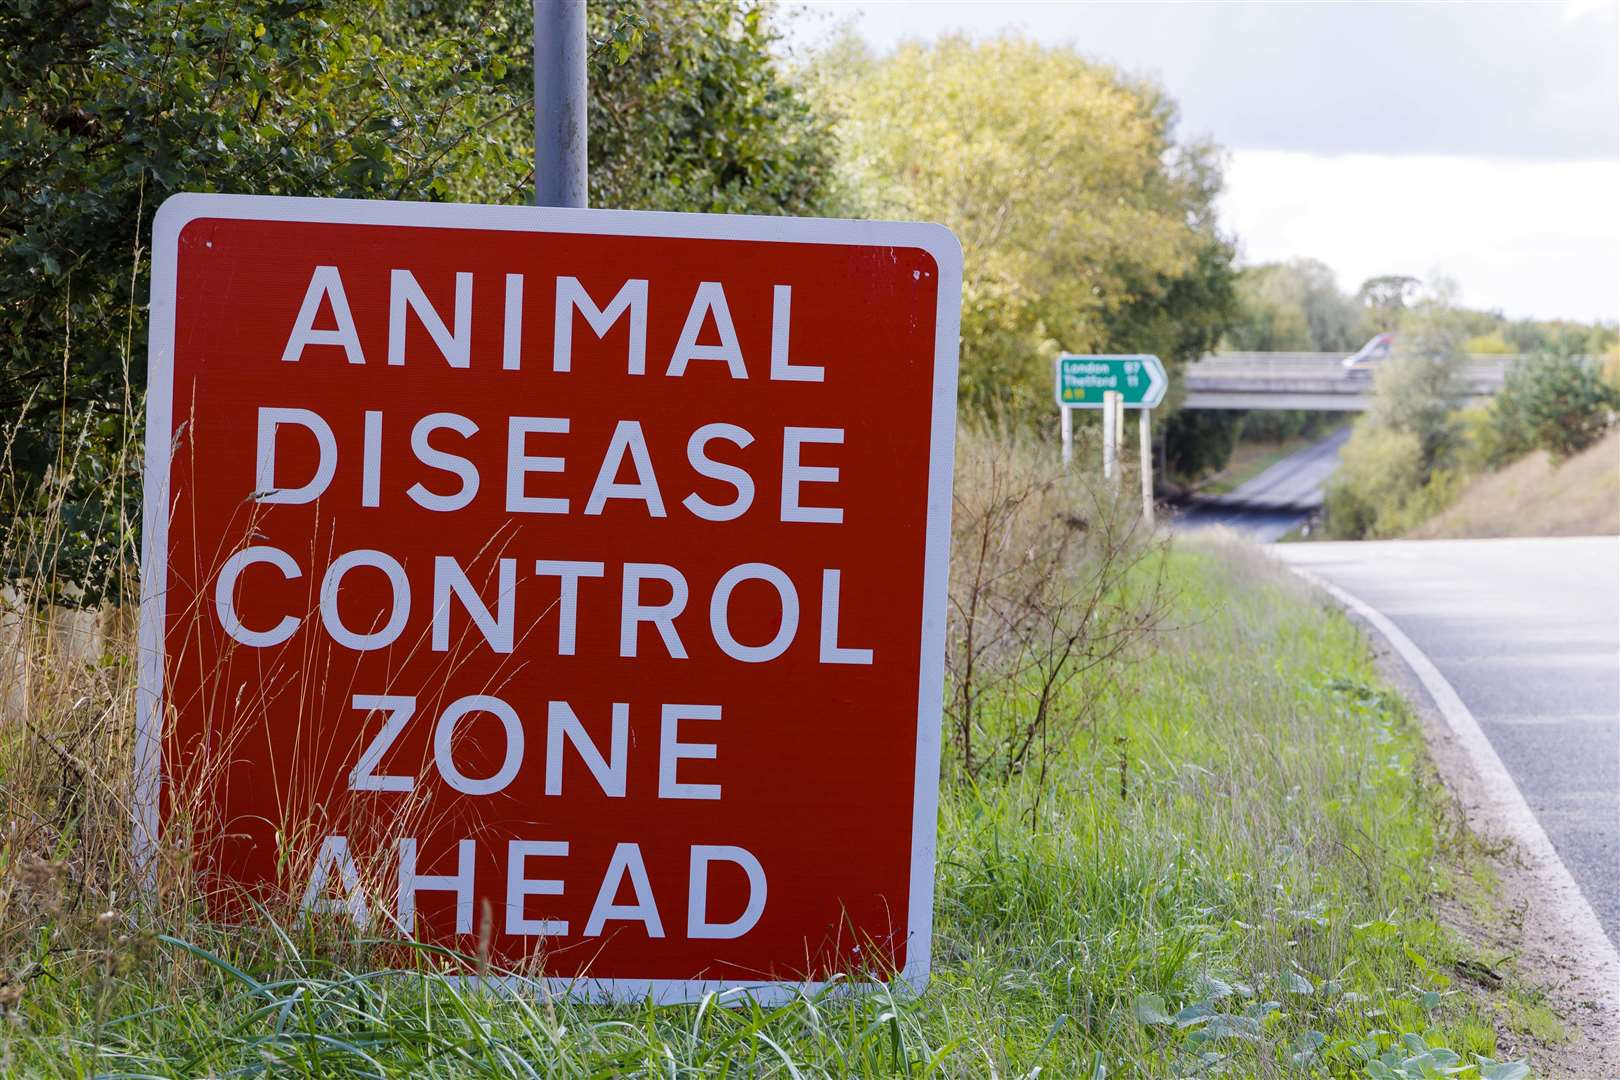 Regional avian flu prevention zones are now in place in a number of counties after recent cases